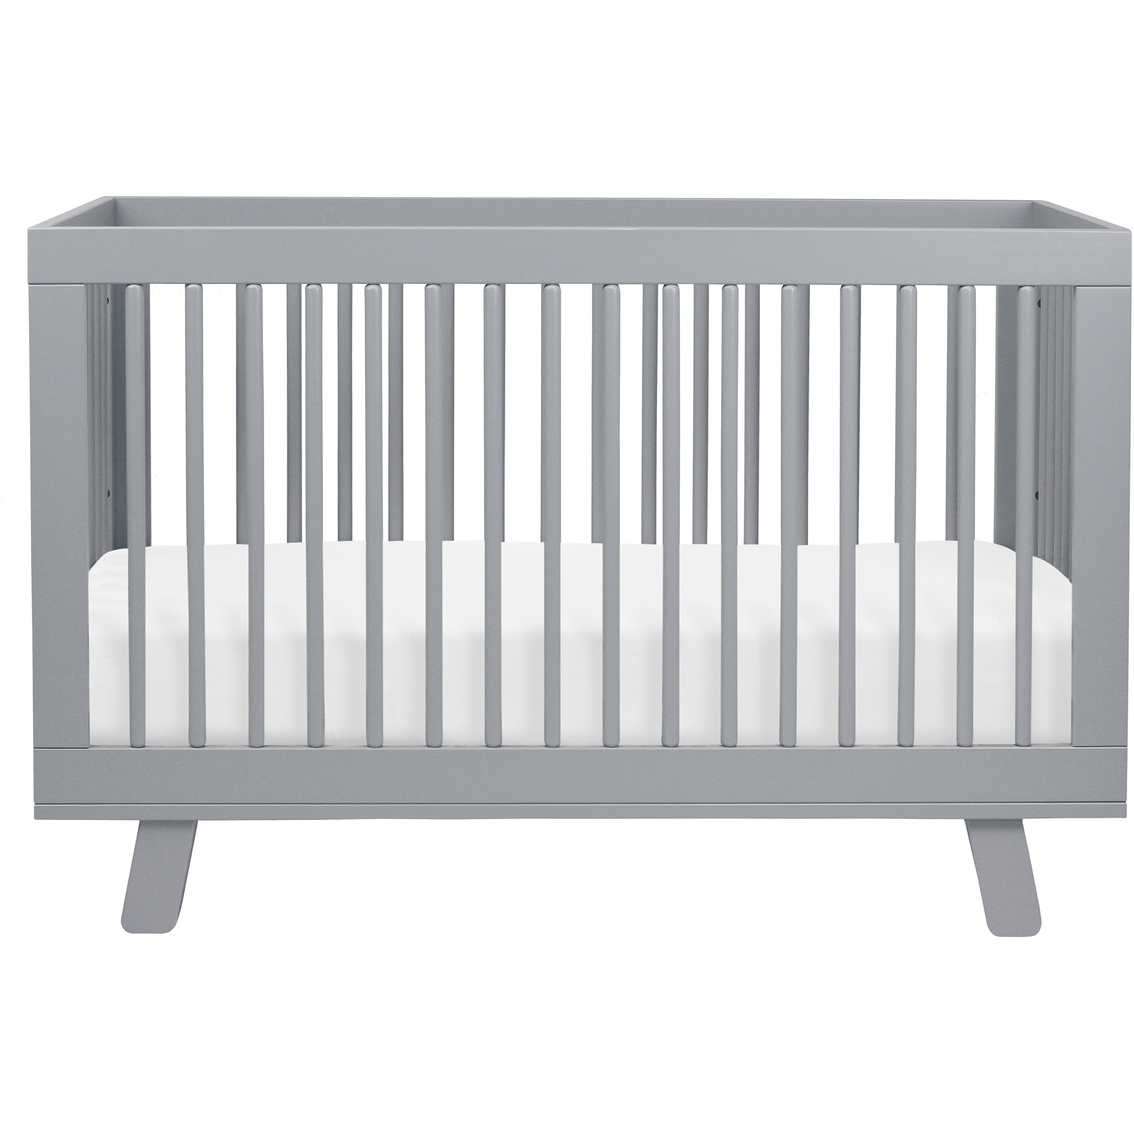 Babyletto Hudson 4 in 1 Crib - Image 2 of 8